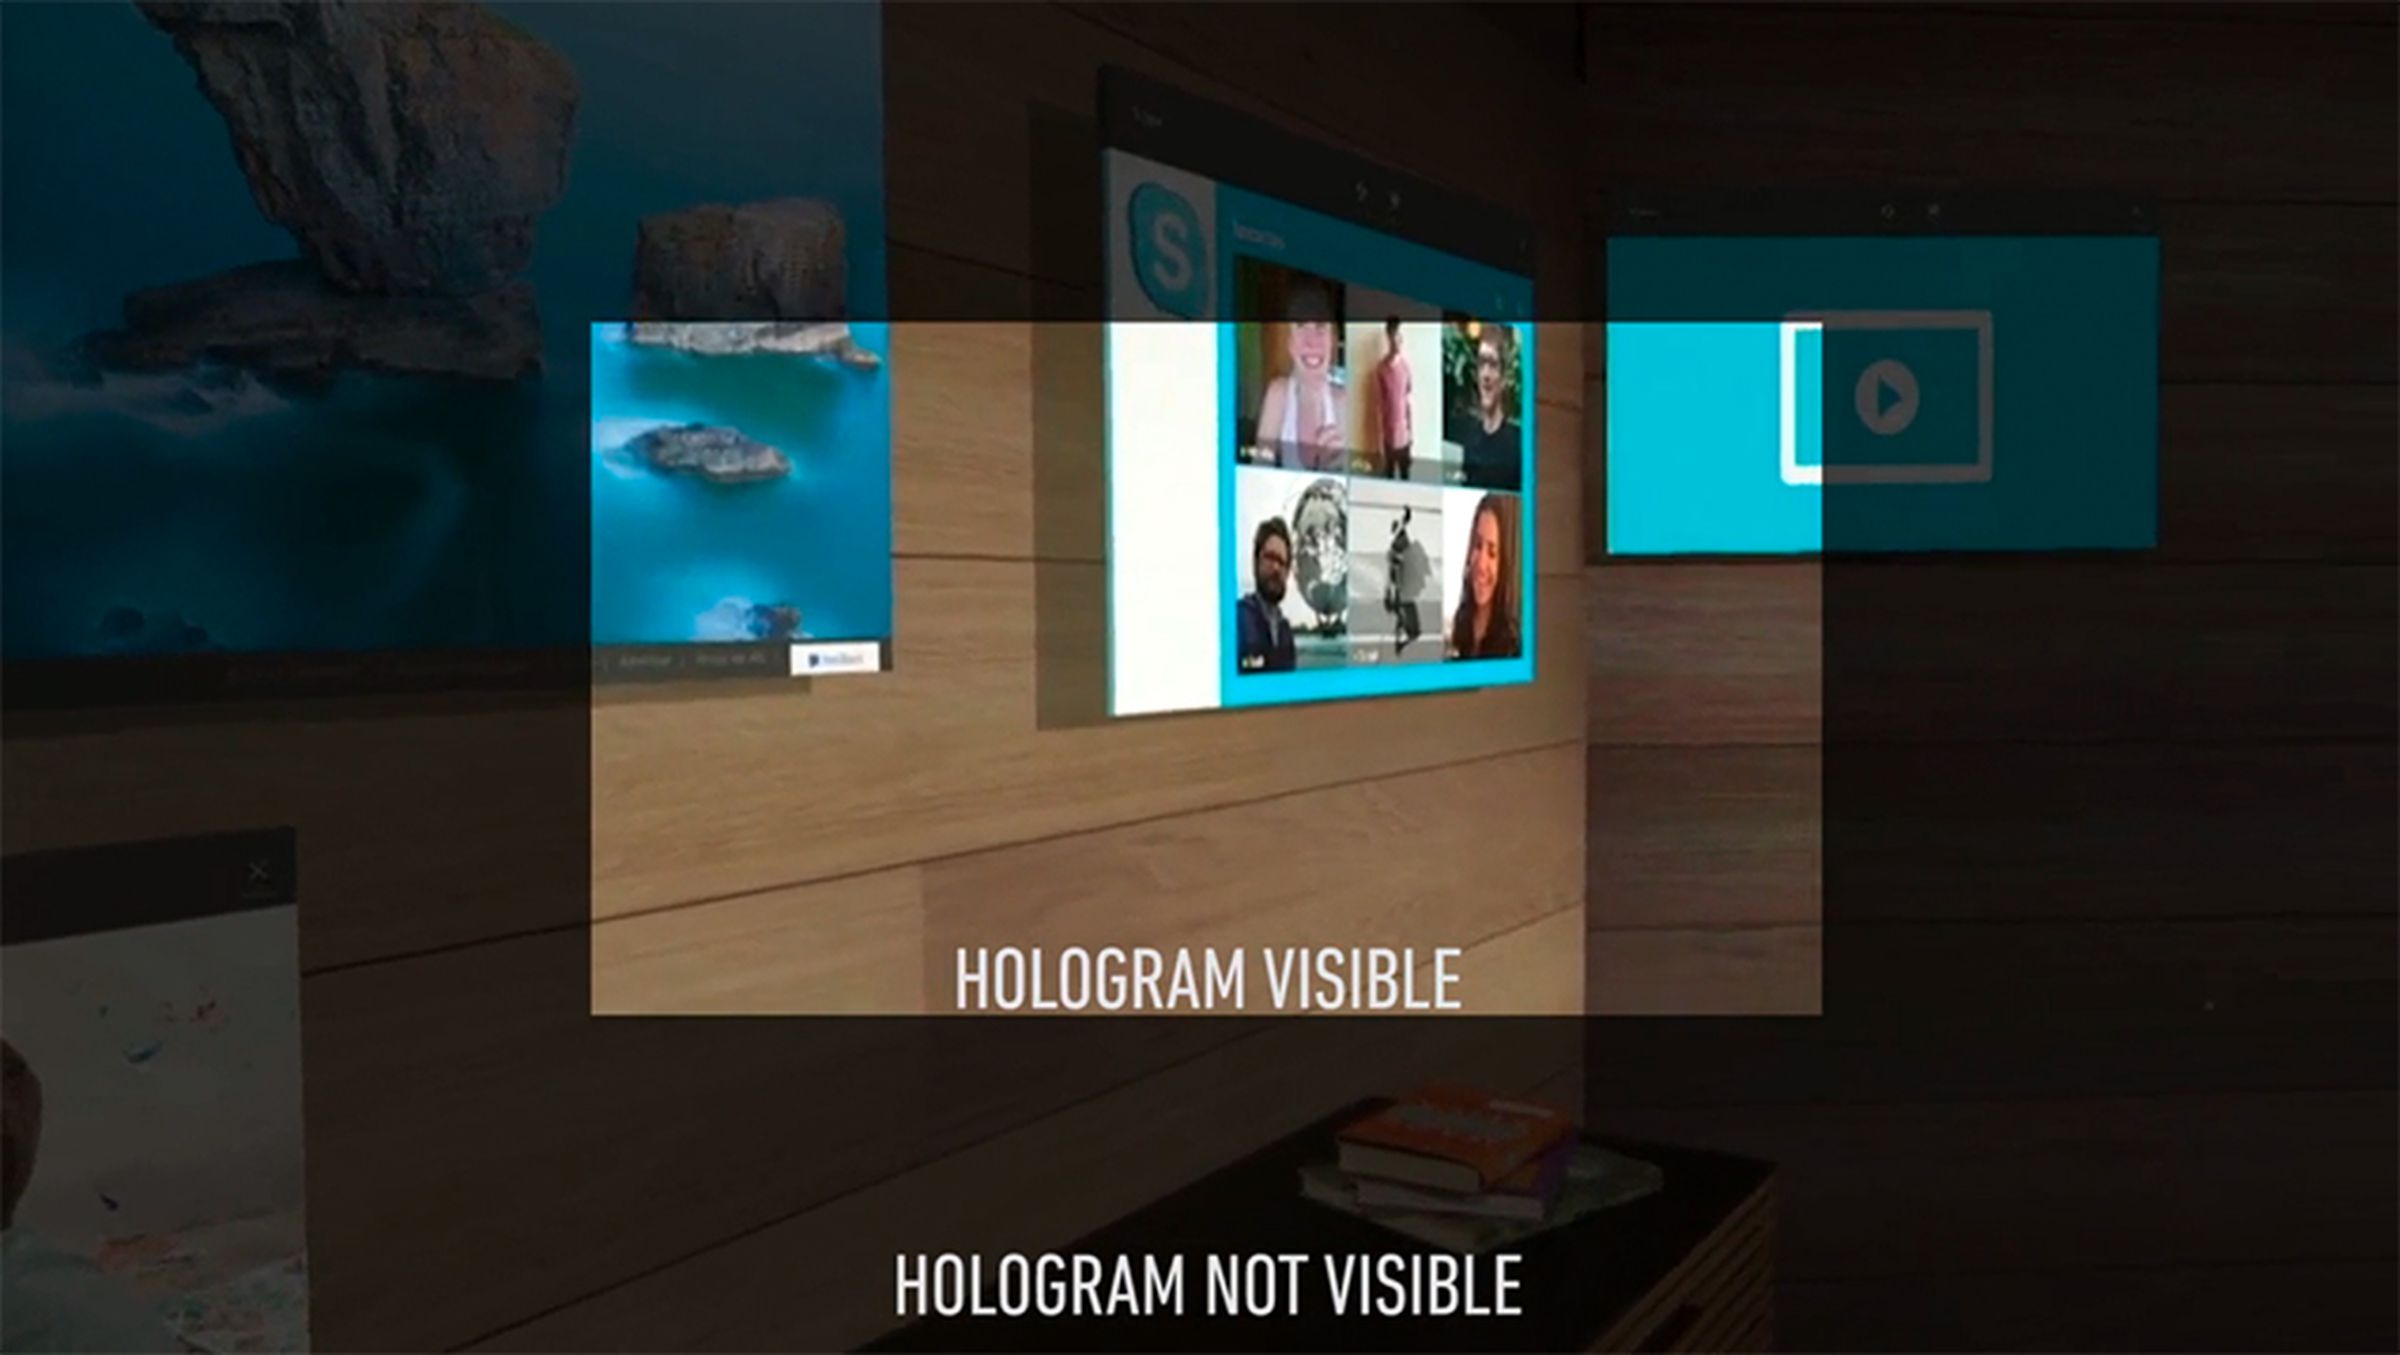 HoloLens field of view